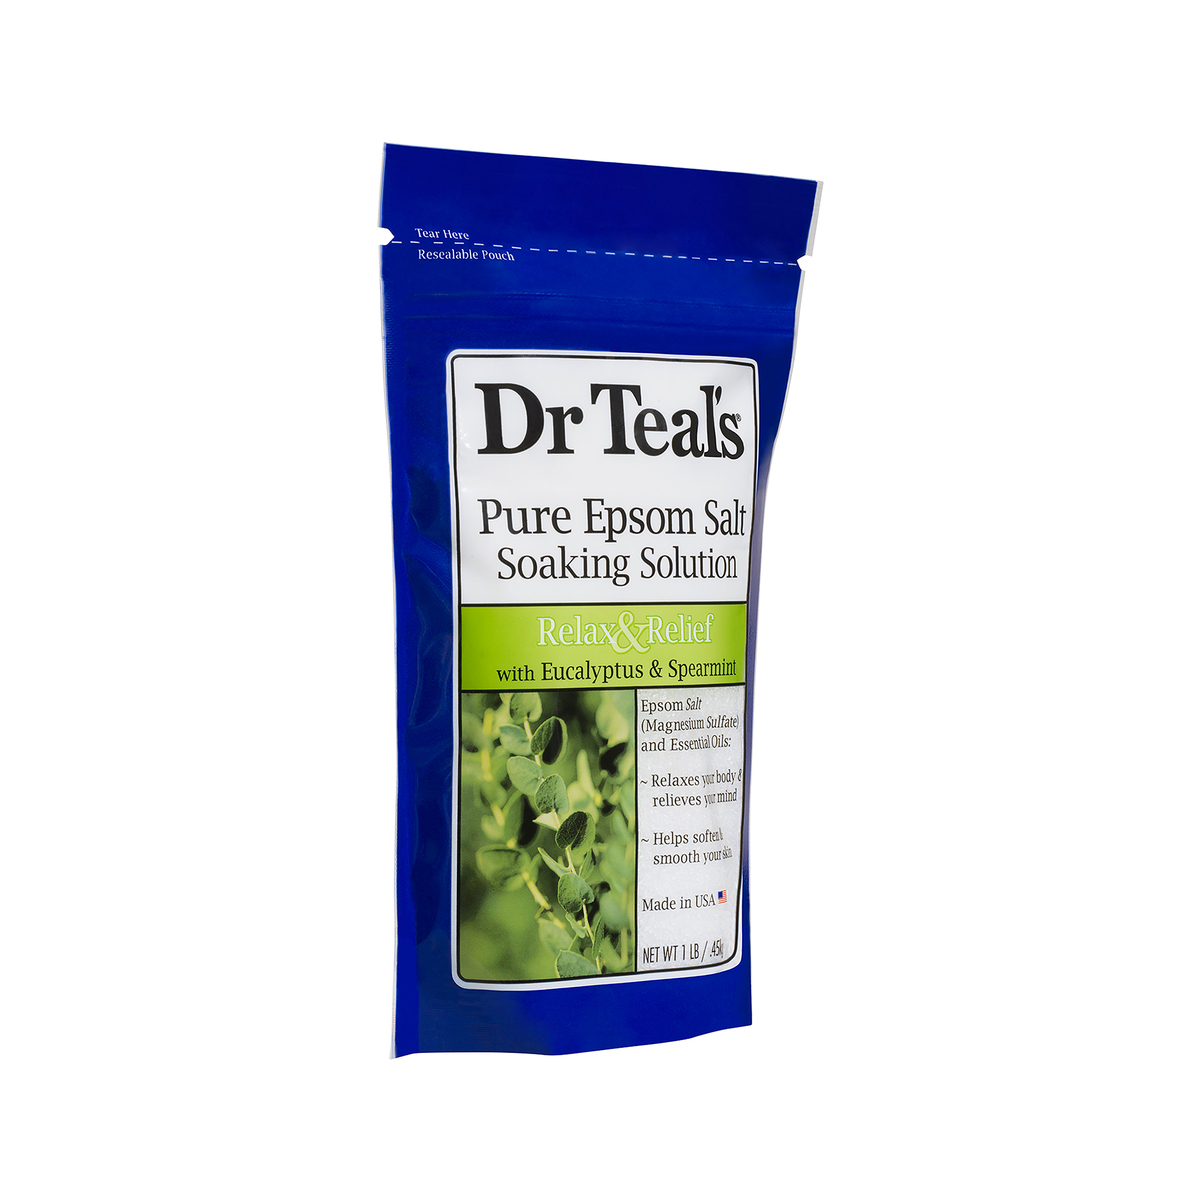 Dr Teal's Relax & Relief With Eucalyptus & Spearmint Pure Epsom Salt Soaking Solution 450g